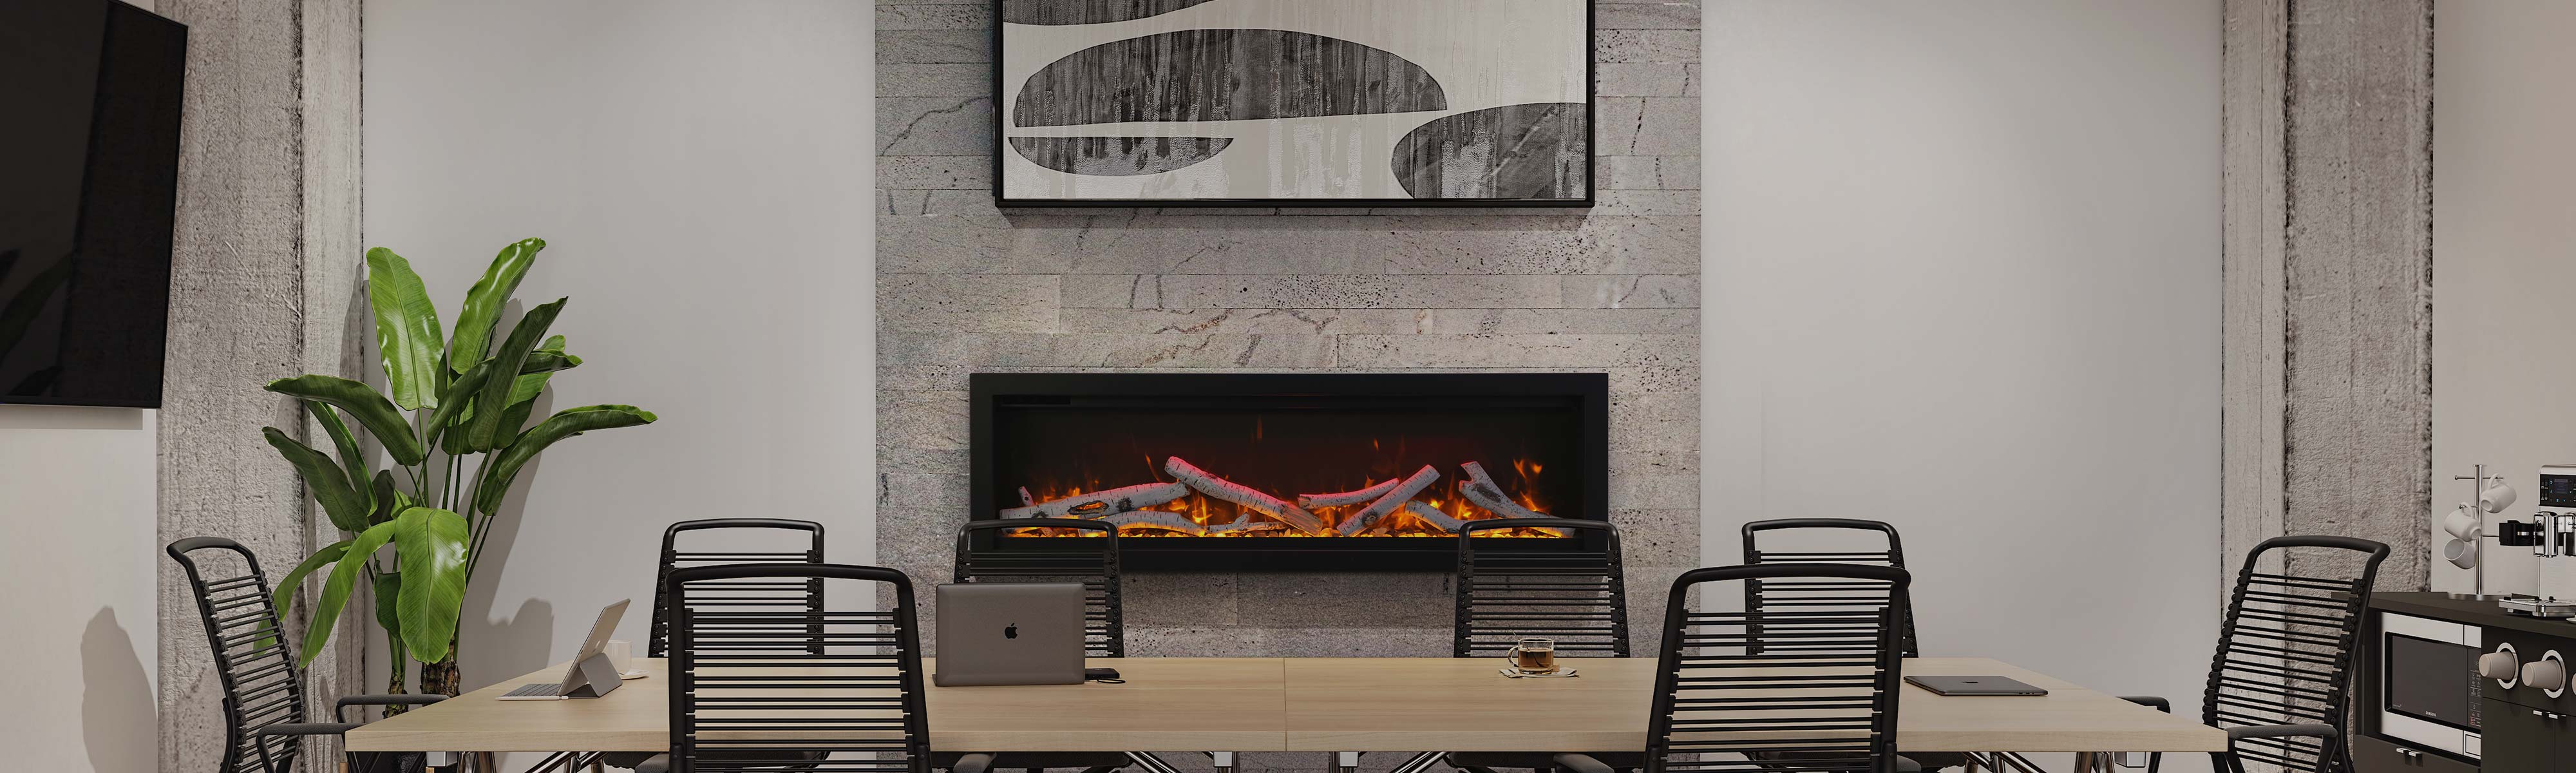 Electric fireplace photo